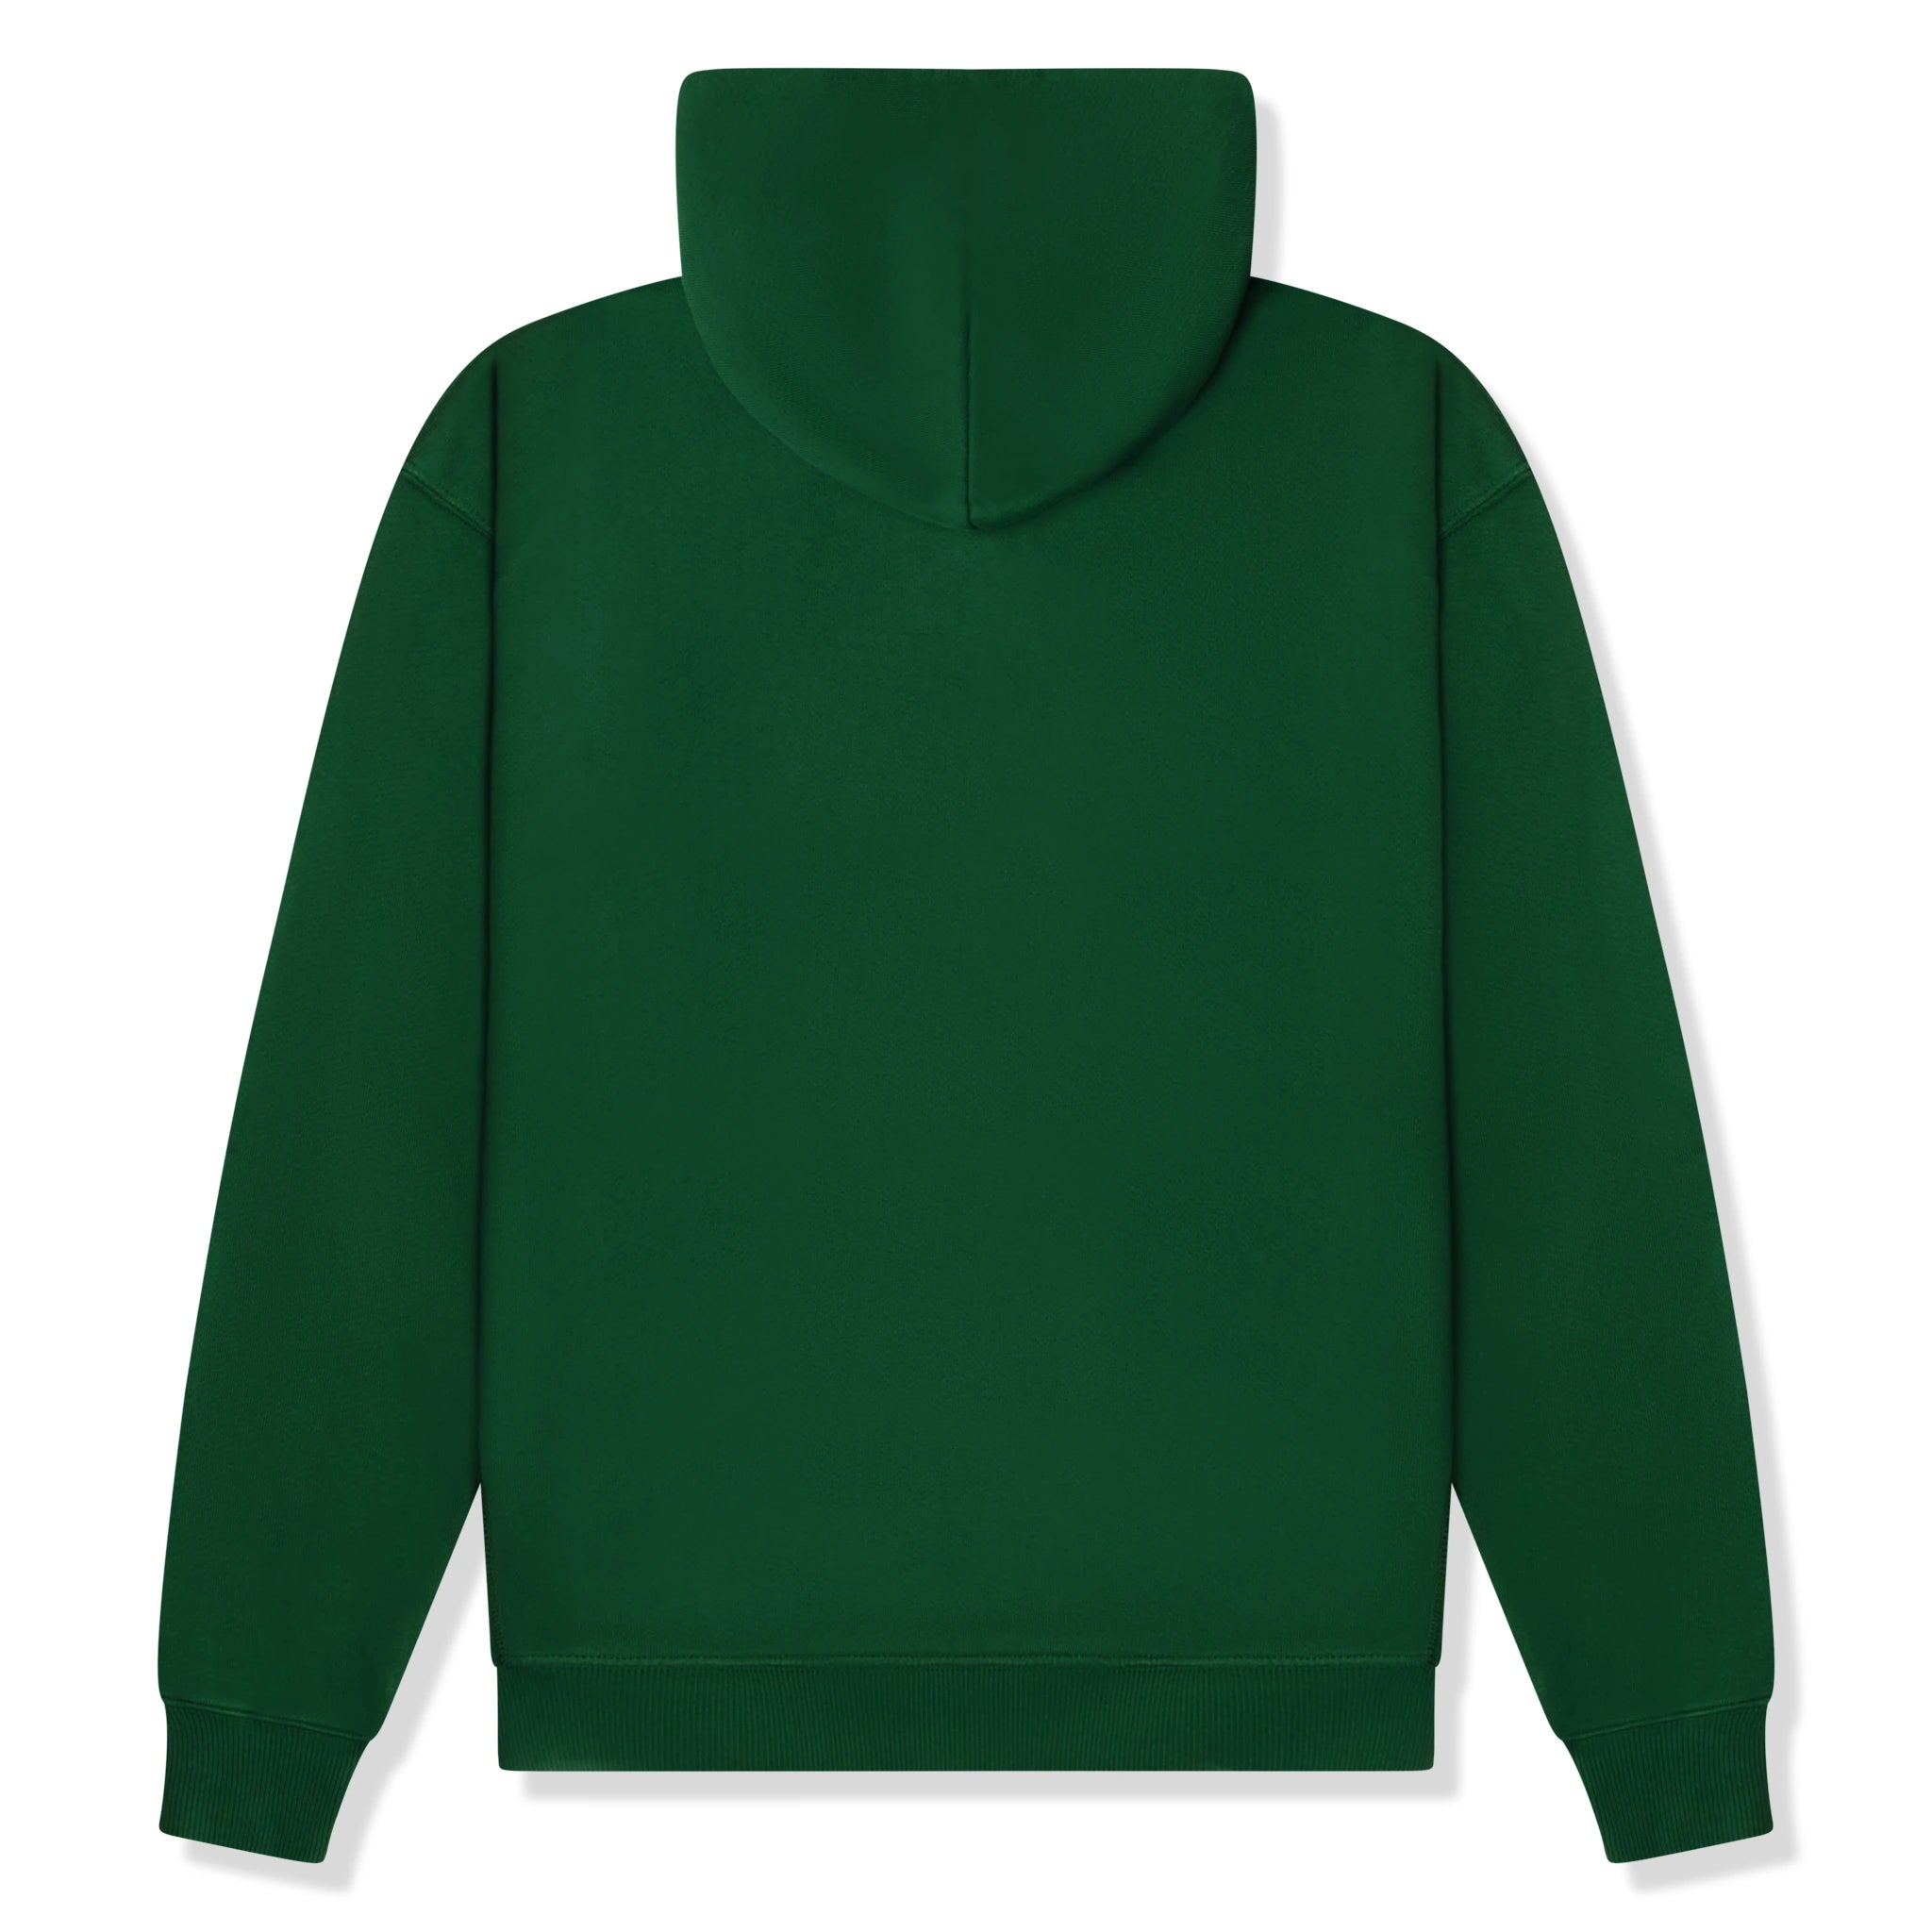 Back view of Eric Emanuel EE Basic Green White Hoodie